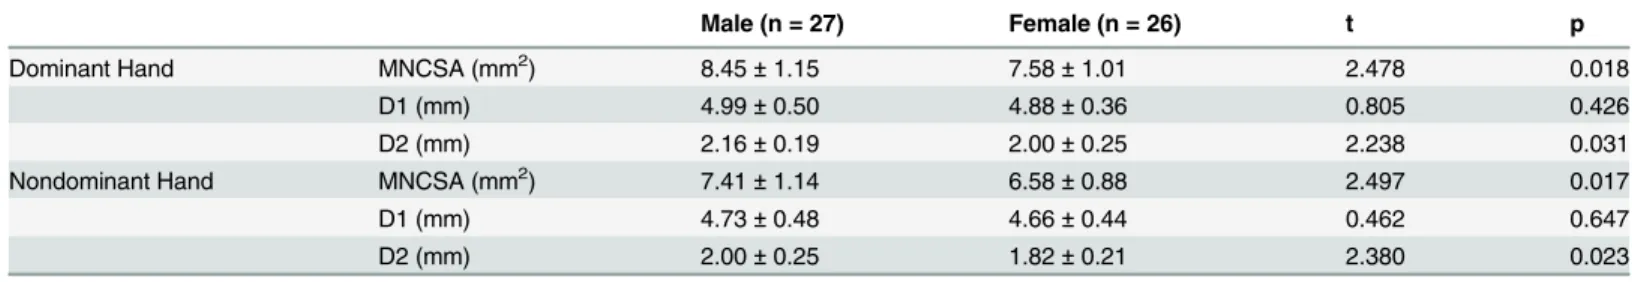 Table 5. Comparison between male and female participants.